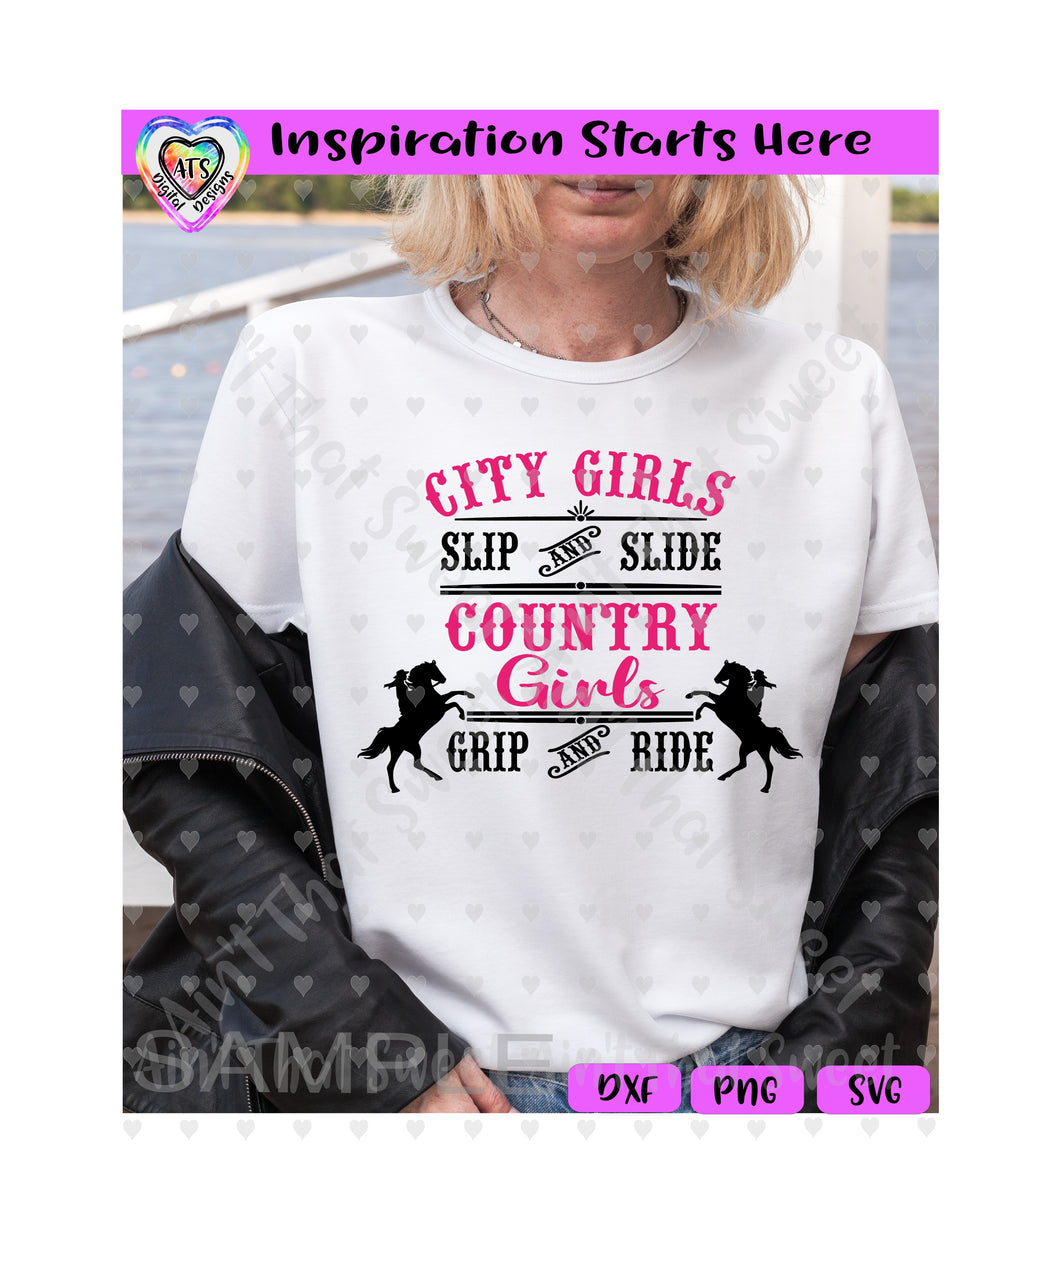 City Girls Slip and Slide Country Girls Grip and Ride - Transparent PNG SVG DXF - Silhouette, Cricut, ScanNCut